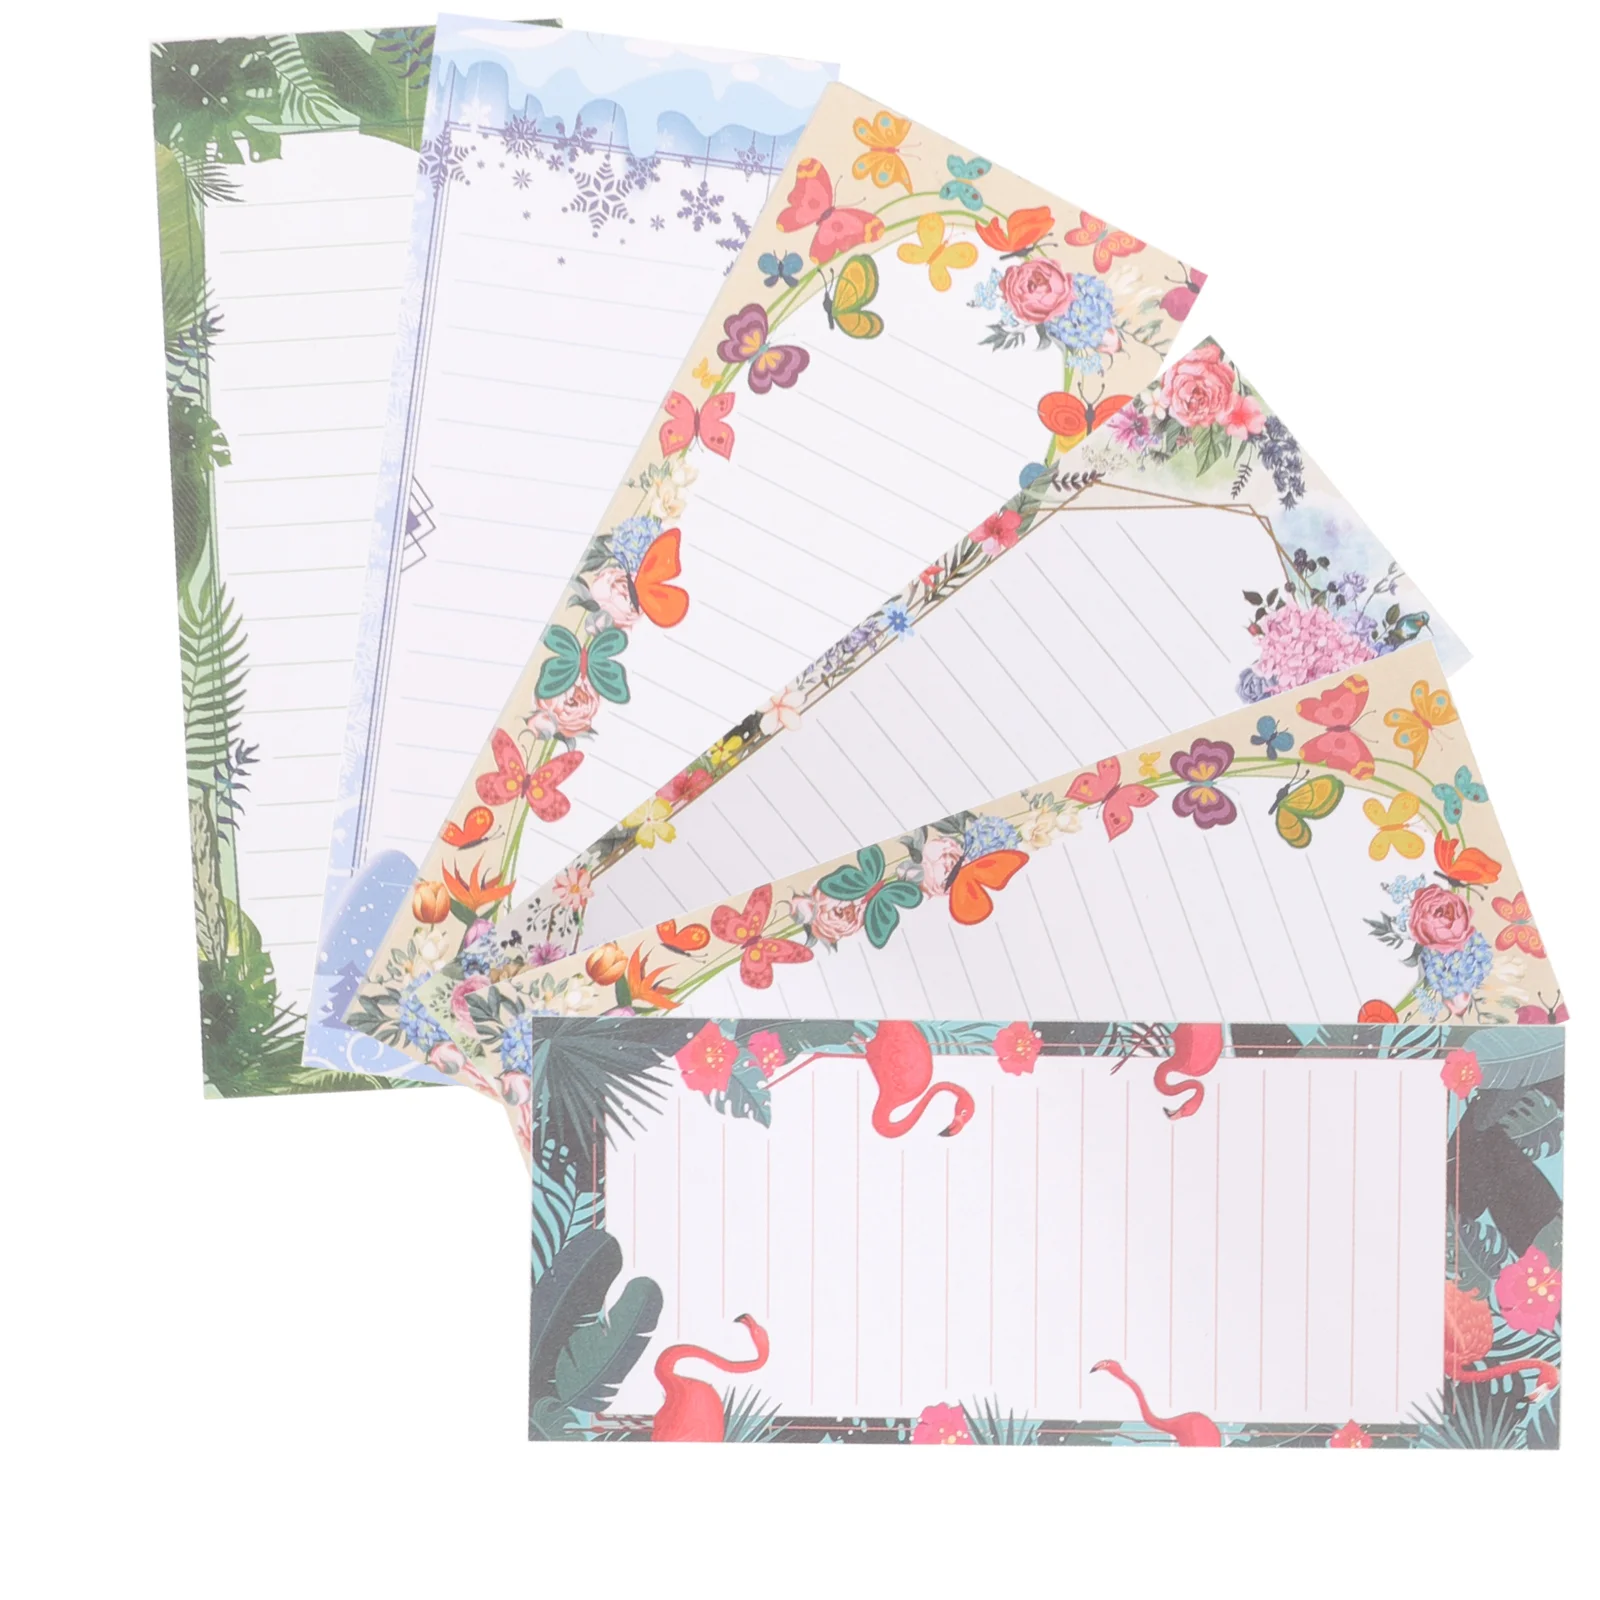 6pcs Magnetic Notepads Grocery List Shopping List Notepads with Magnet Fridge Memo Notepads 6pcs magnetic notepads grocery list shopping list notepads with magnet fridge memo notepads